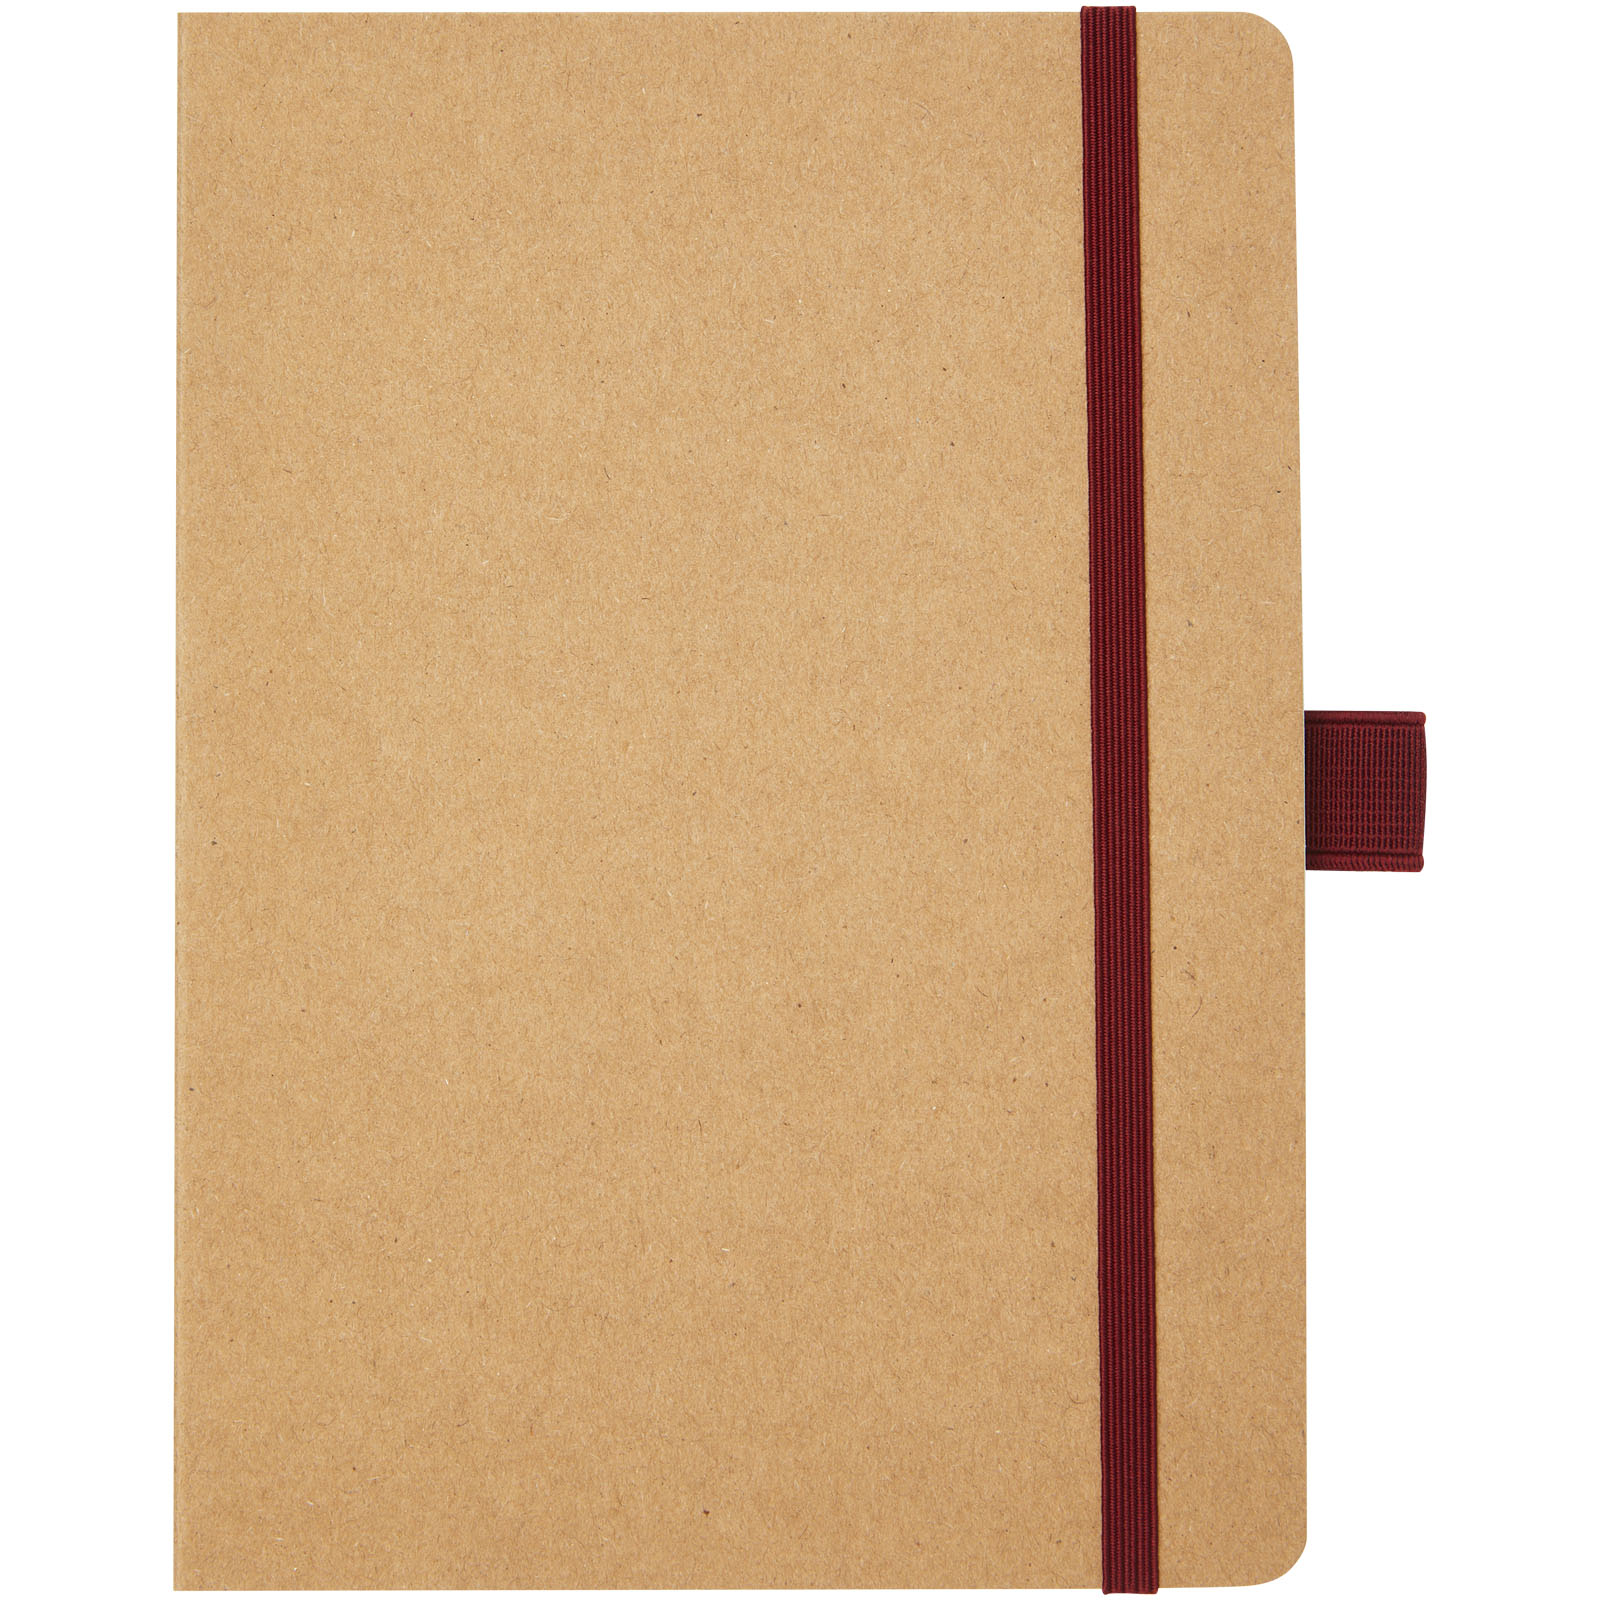 Advertising Soft cover notebooks - Berk recycled paper notebook - 1